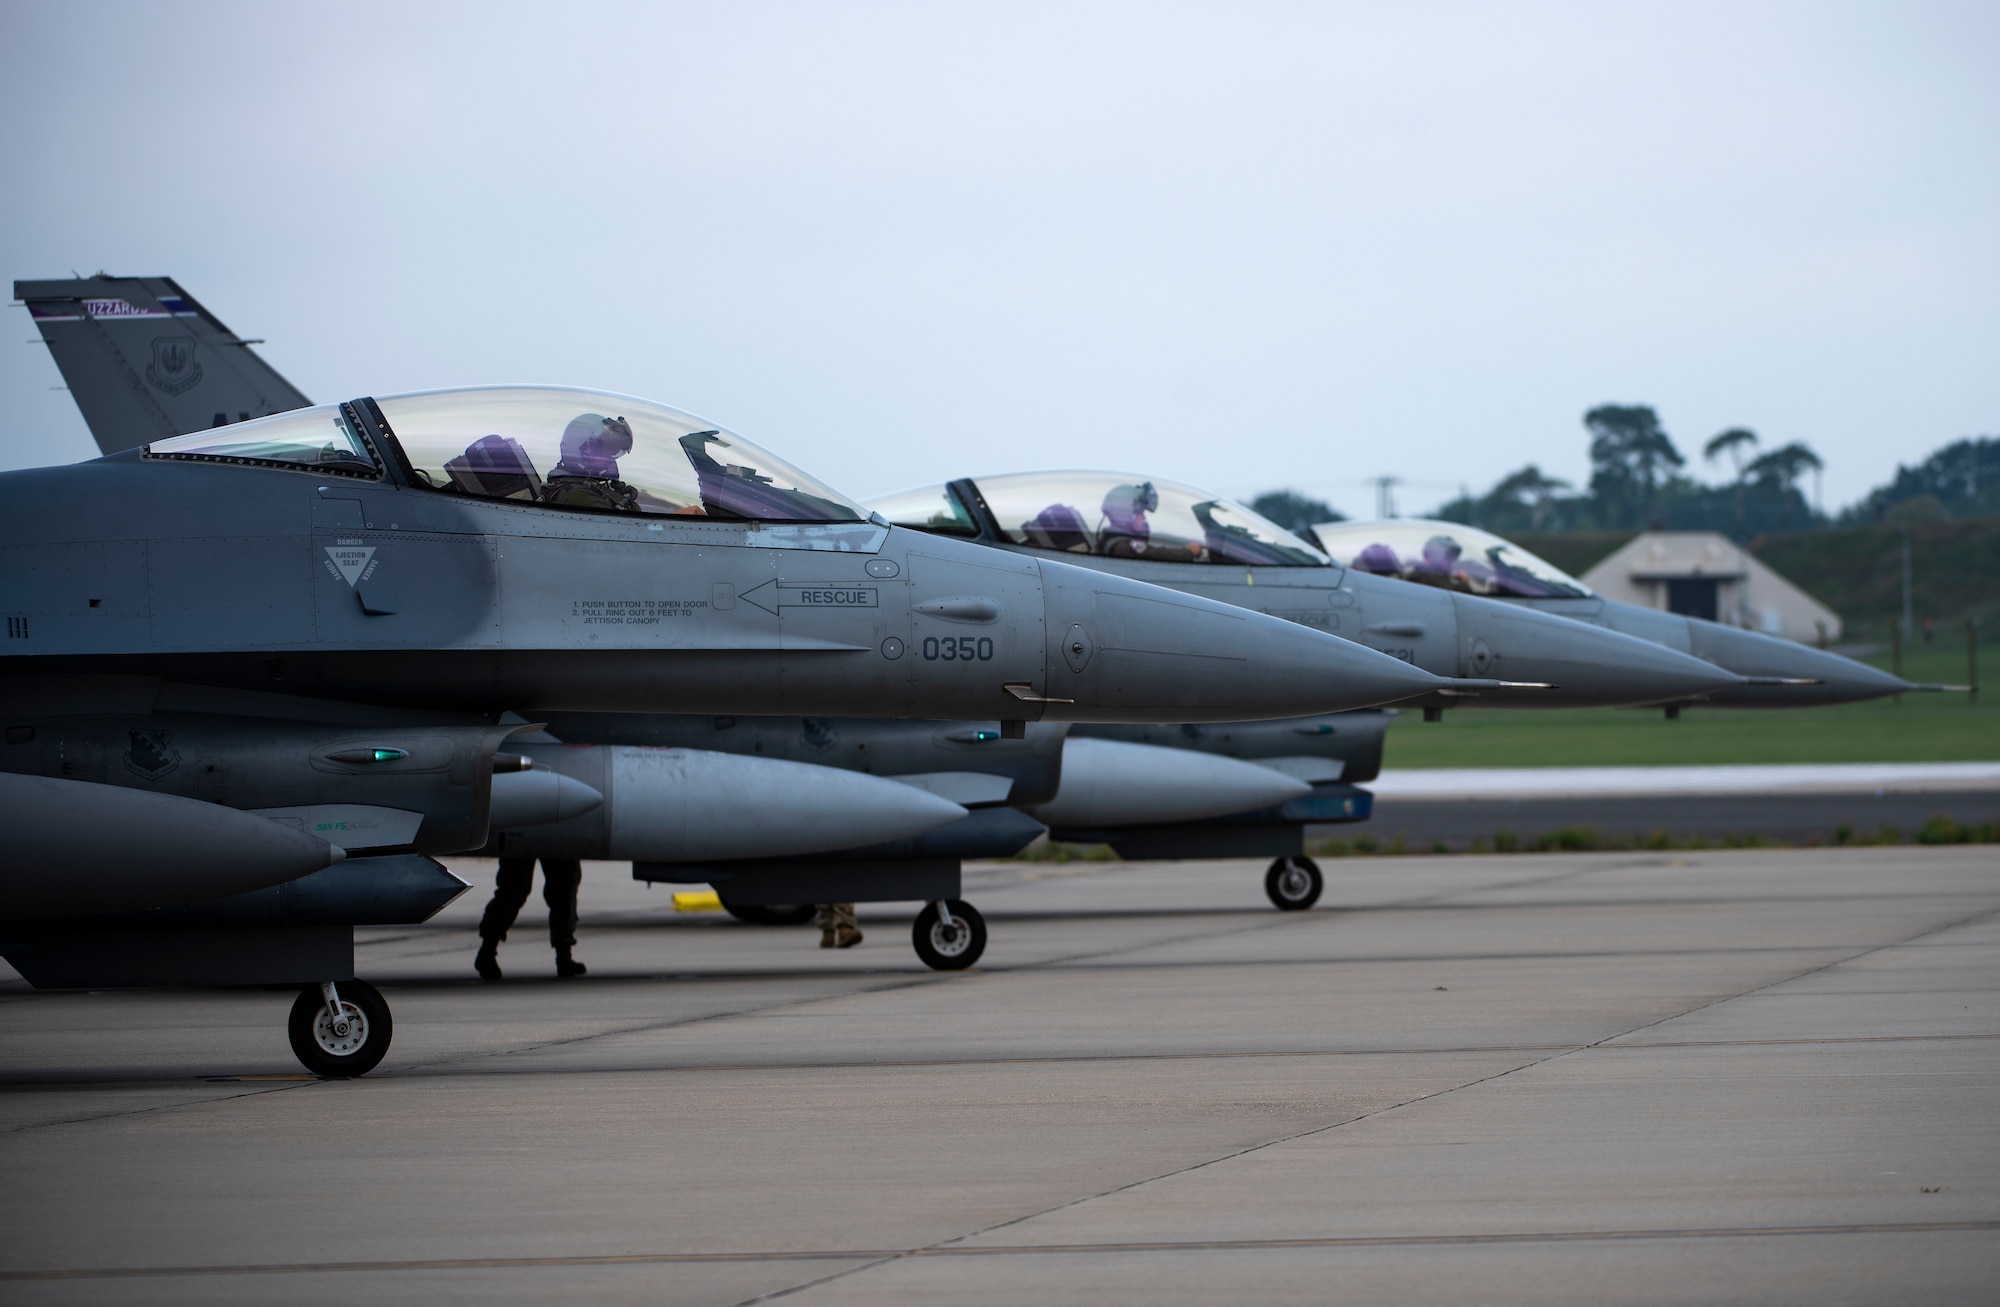 U.S. Air Force F-16 Fighting Falcons, assigned to the 510th Fighter Squadron, Aviano Air Base, Italy, arrive at Royal Air Force Lakenheath, England, Aug. 28, 2020. Aircraft and Airmen from the 510th FS are participating in a flying training deployment event to enhance interoperability, maintain joint readiness and strengthen relationships with regional allies and partners. (U.S. Air Force photo by Airman 1st Class Jessi Monte)